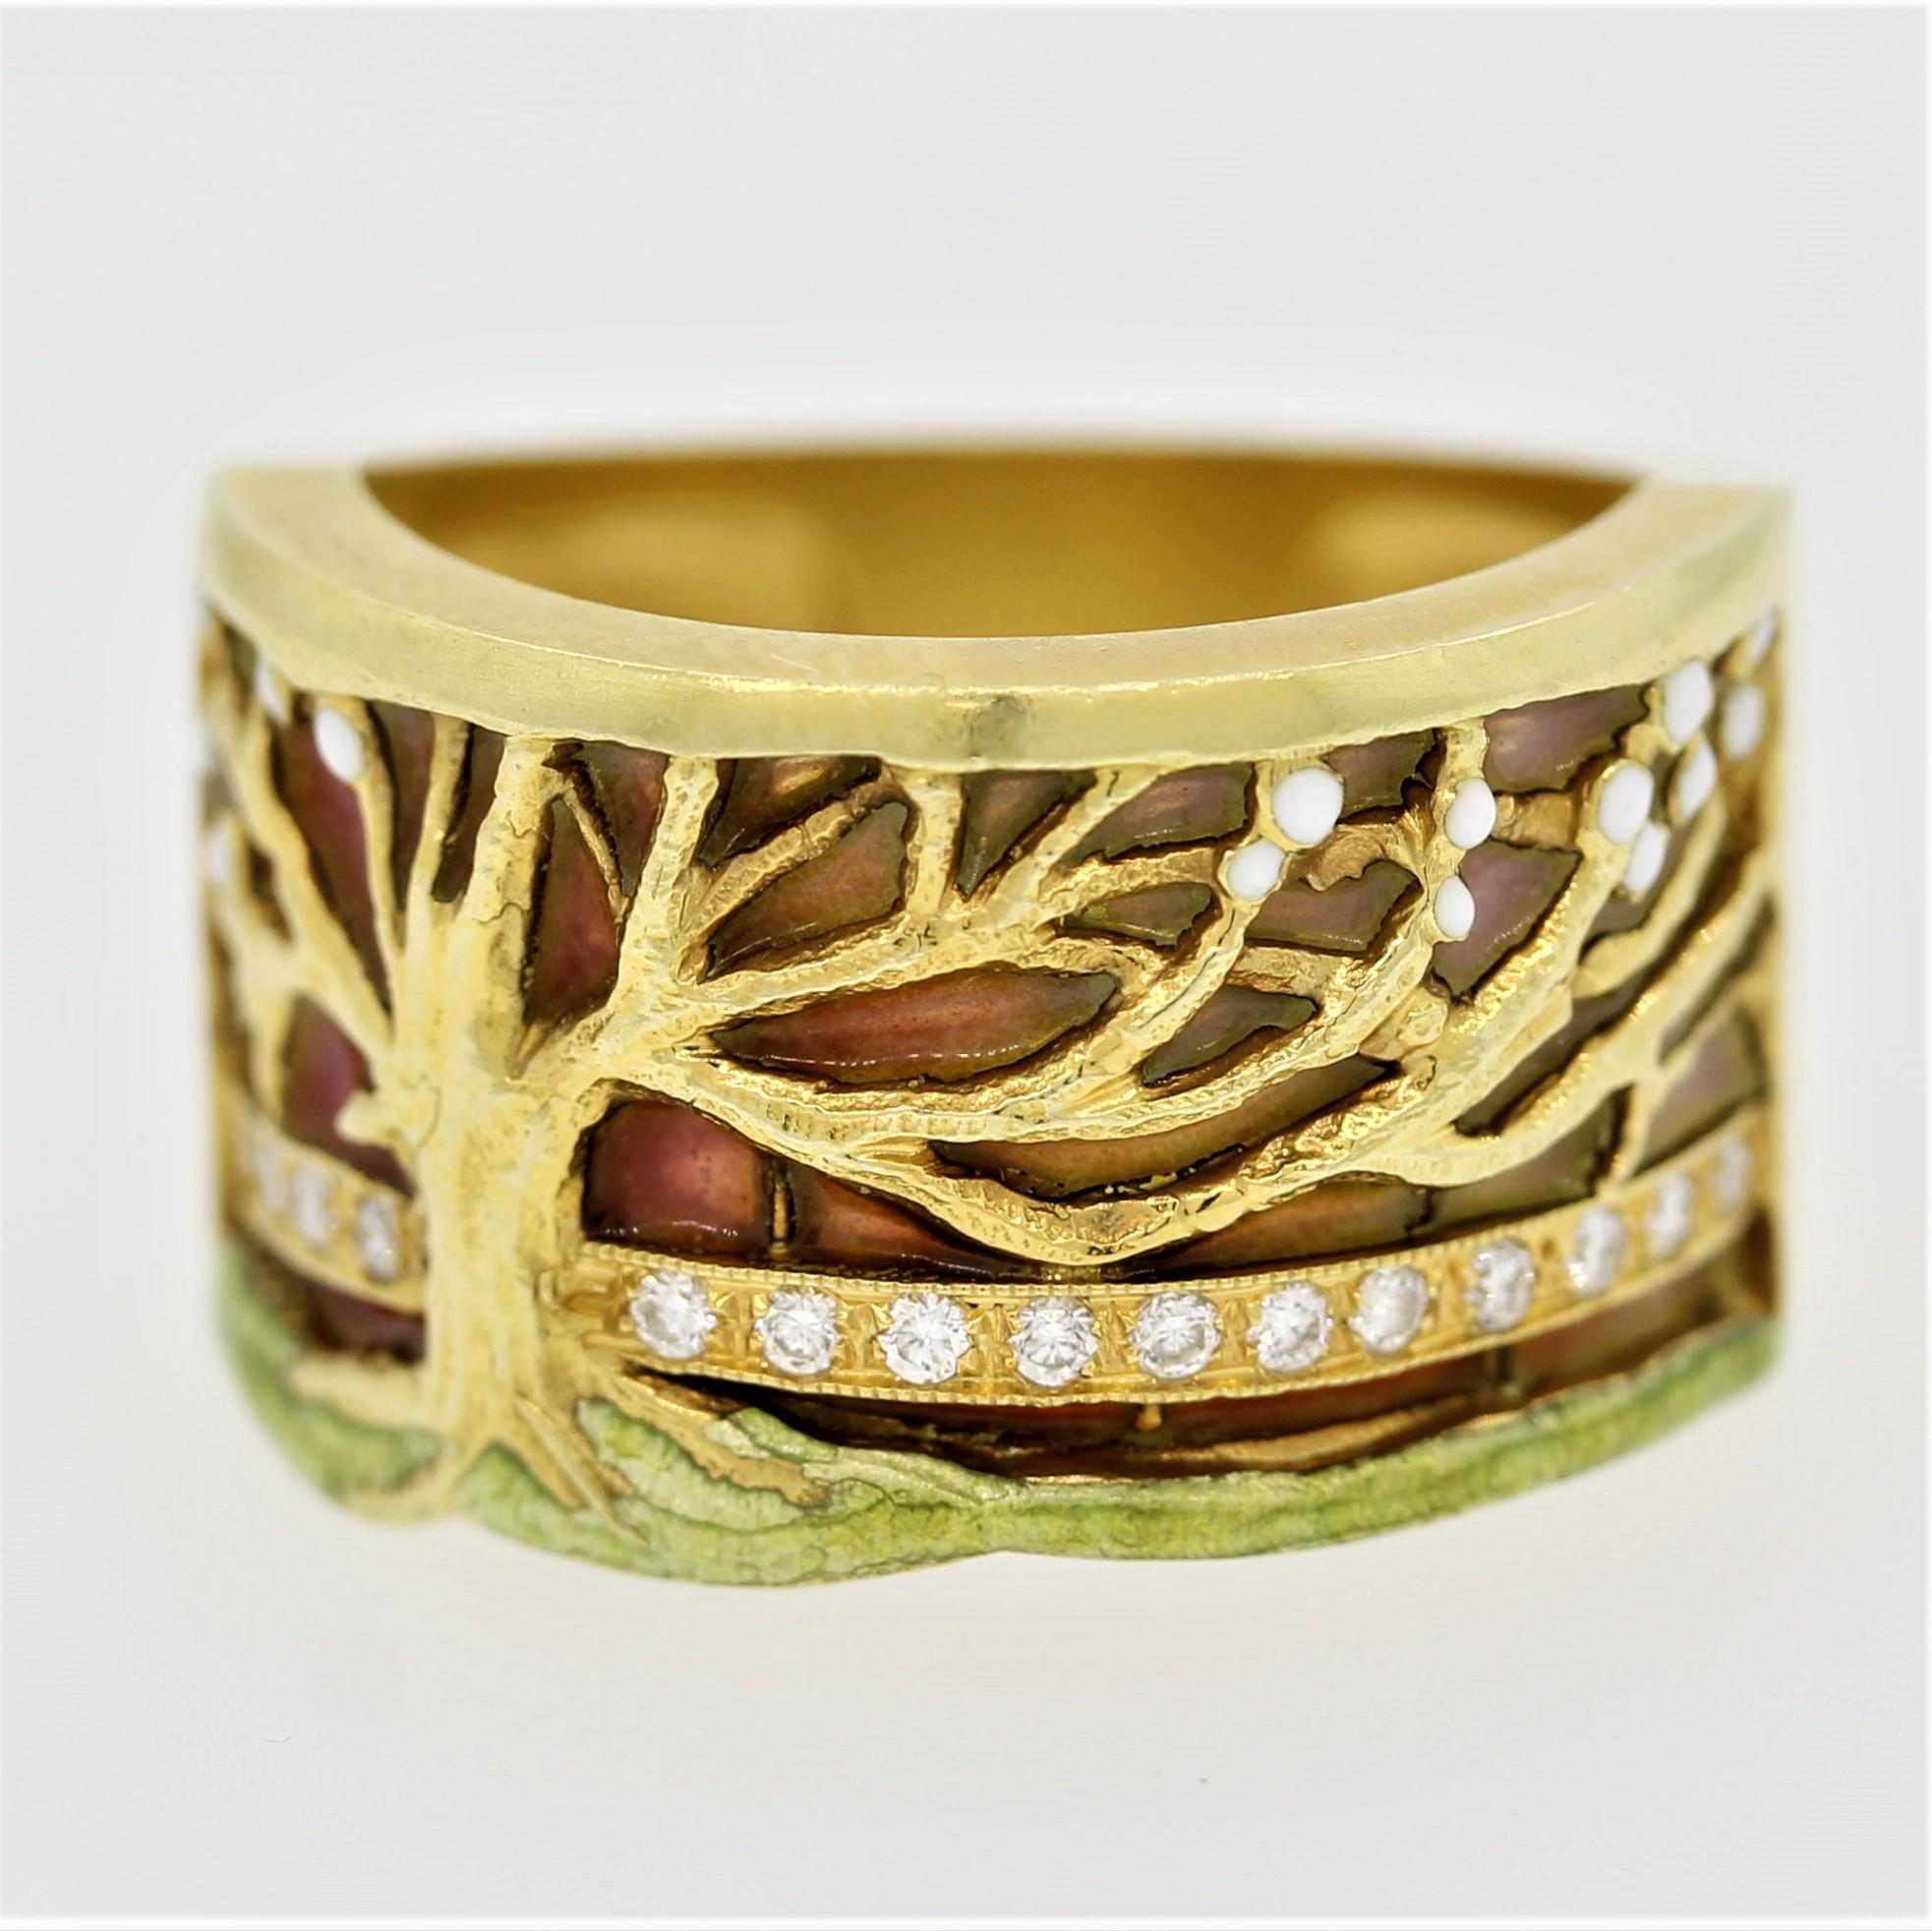 A special piece from renowned Spanish designer based in Barcelona, Masriera. In their typical style this piece features hand painted enamel over gold and enamel without a backing which is called “plique-a-jour’ in French. It is like a stained-glass